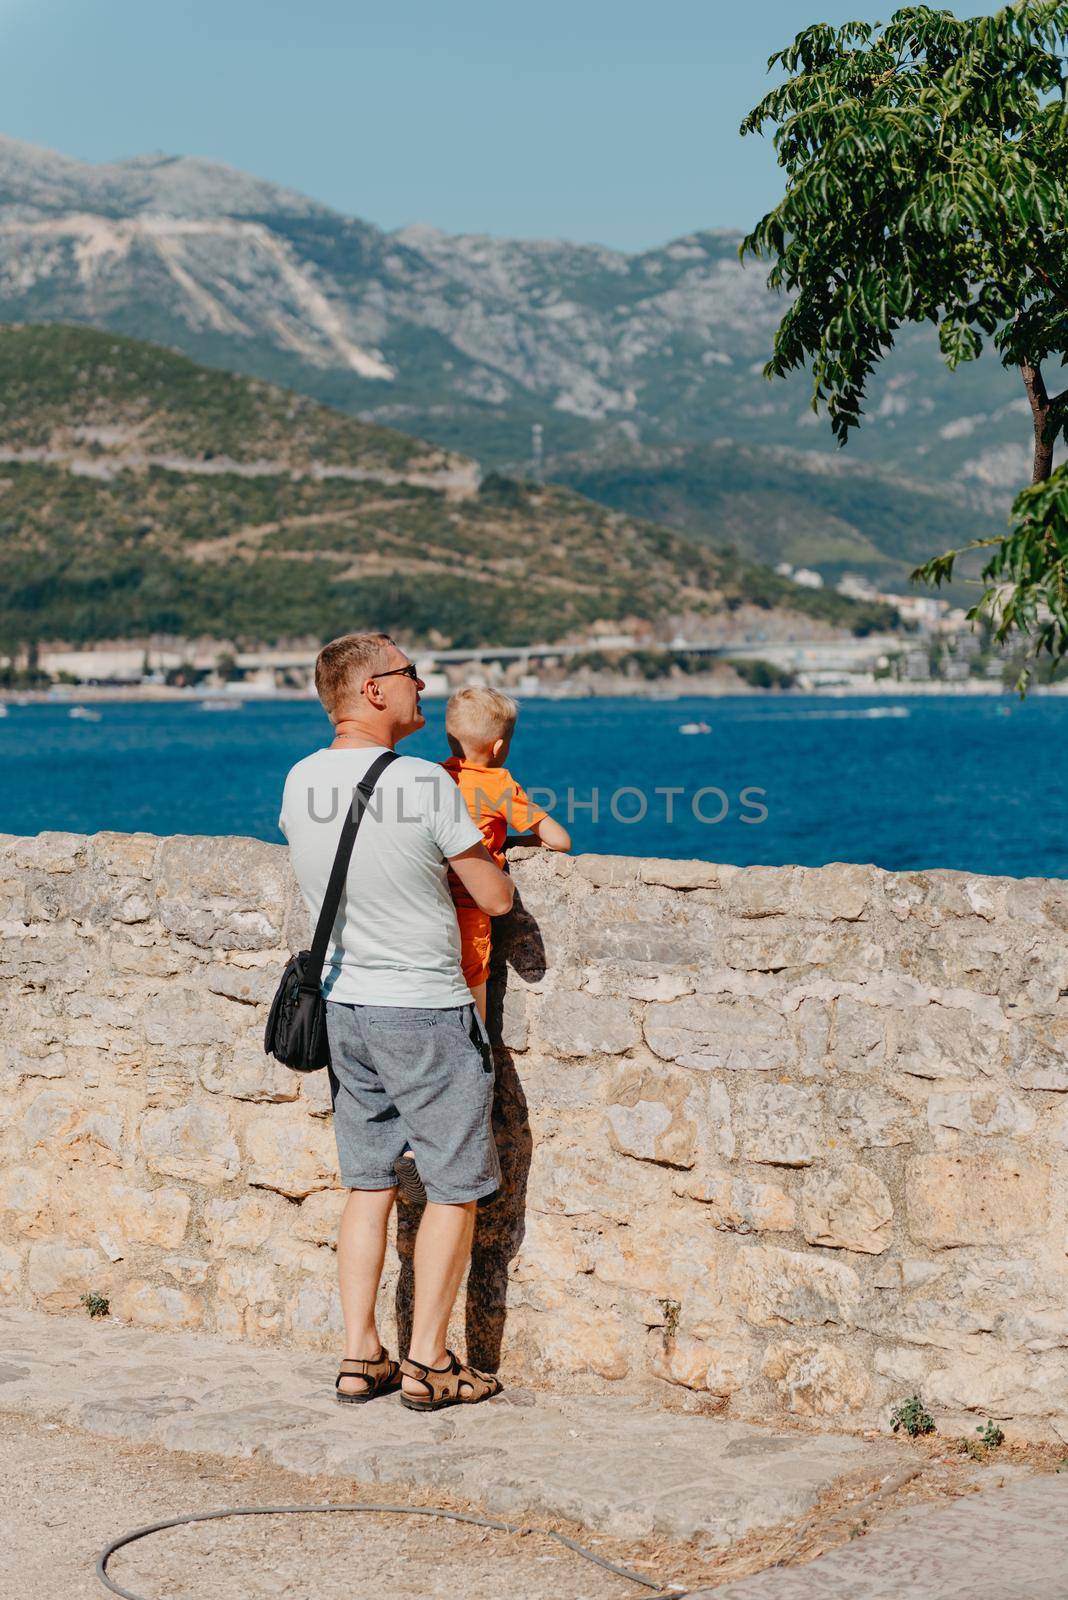 Cute family are having fun on the beach. Father and child against the background of the blue sea and sky. Travel, active lifestyle, vacation, rest concept. a man with a child on the shore. tourists on the shore of Budva, Montenegro by Andrii_Ko